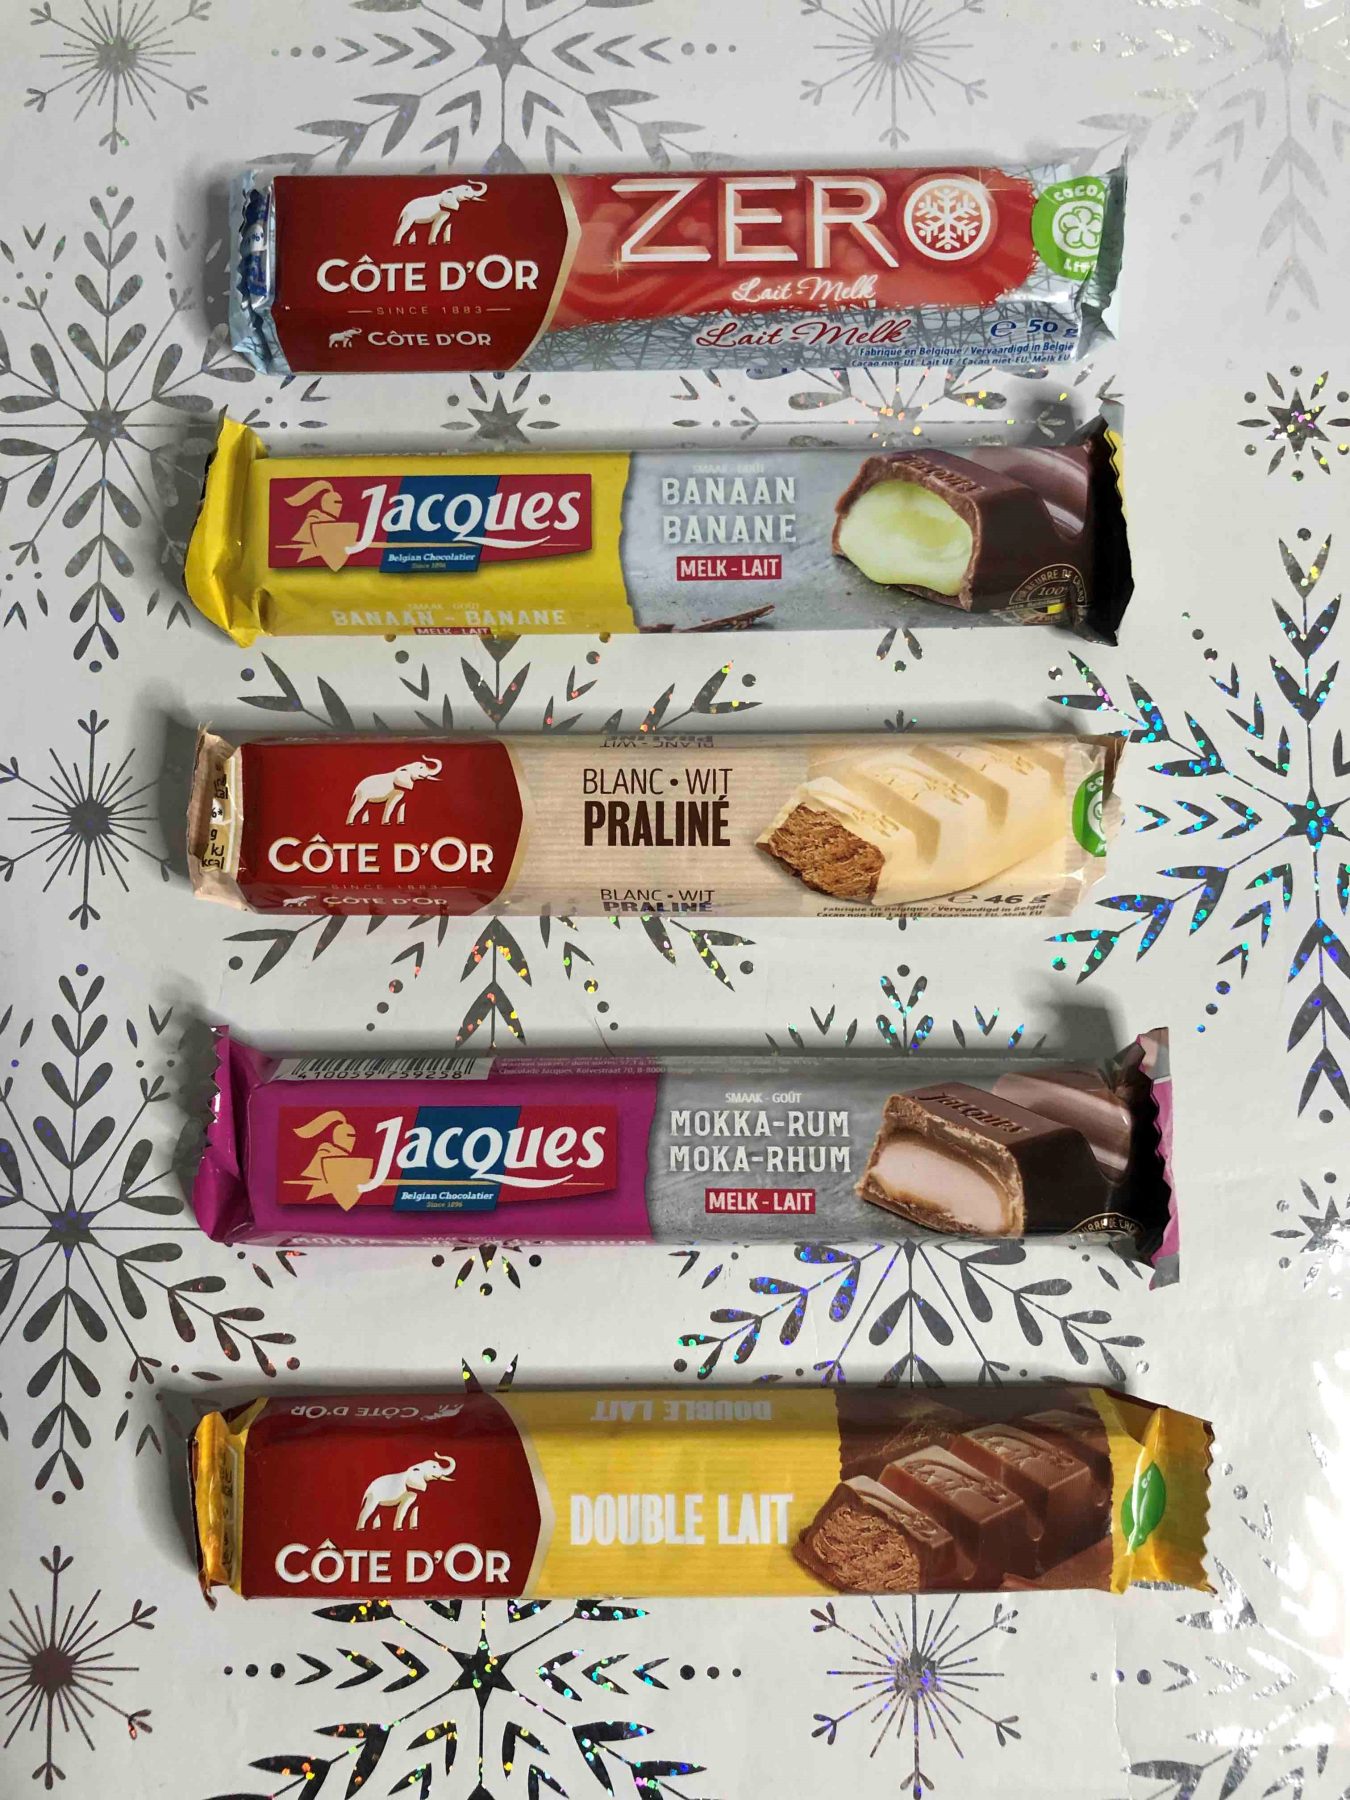 5 bars of Jacques and Cote D'or chocolate